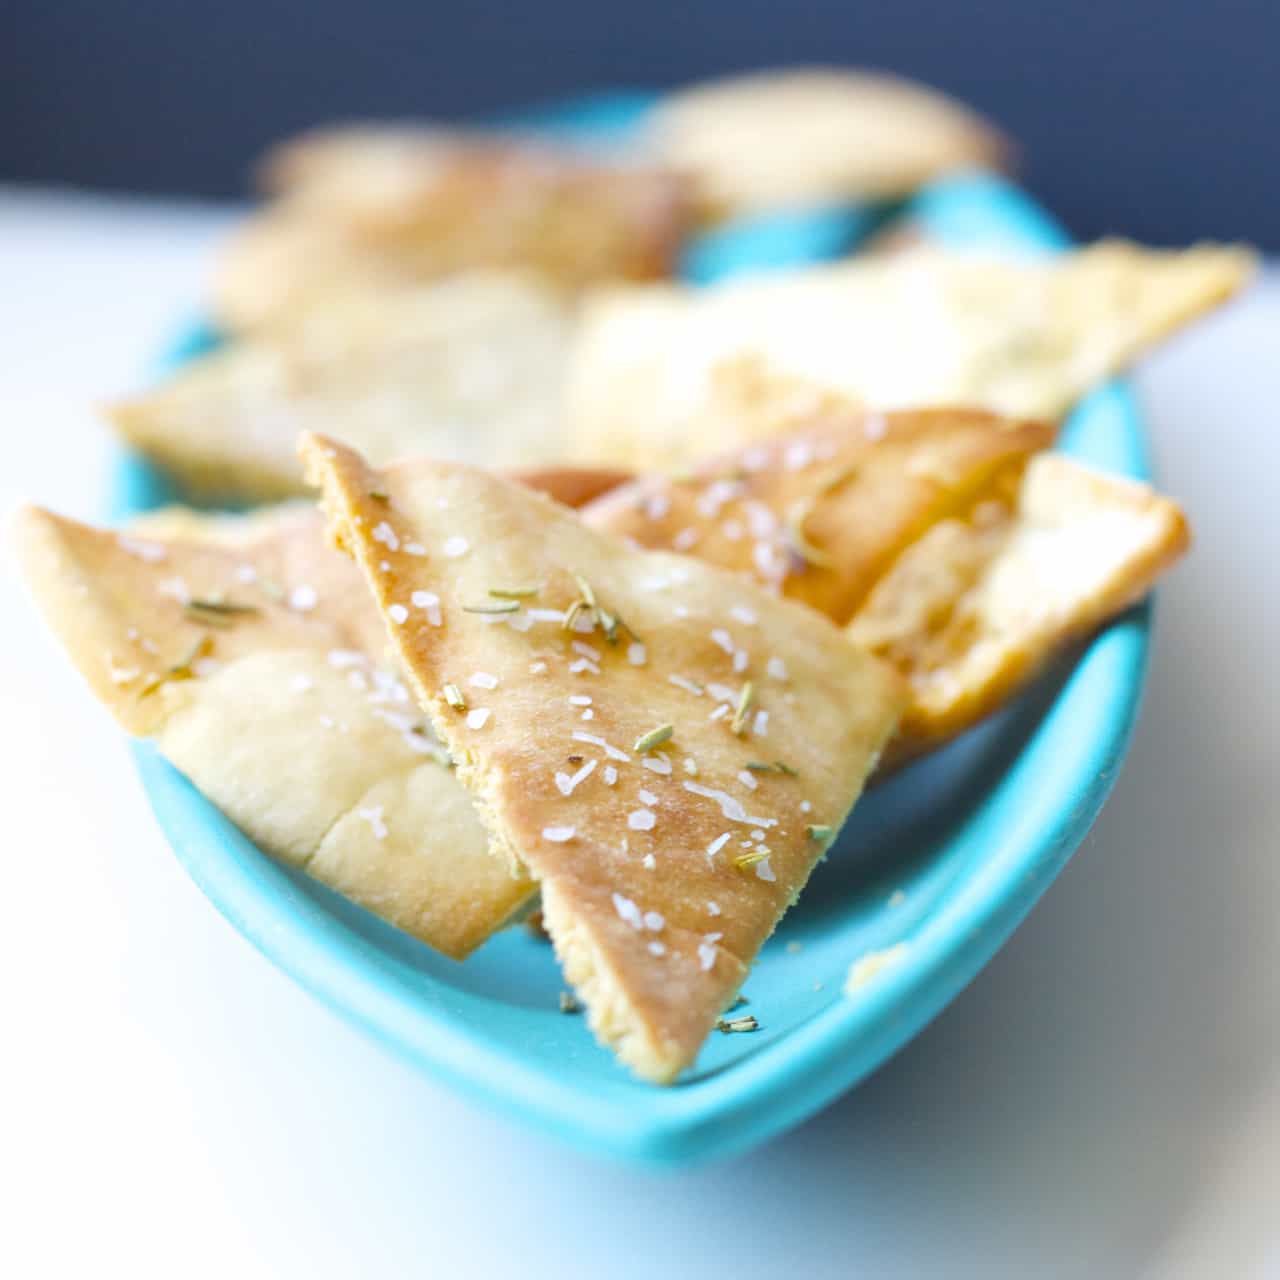 These homemade pita chips are seasoned with salt and rosemary and baked to crispy perfection. An easy snack to make at home!